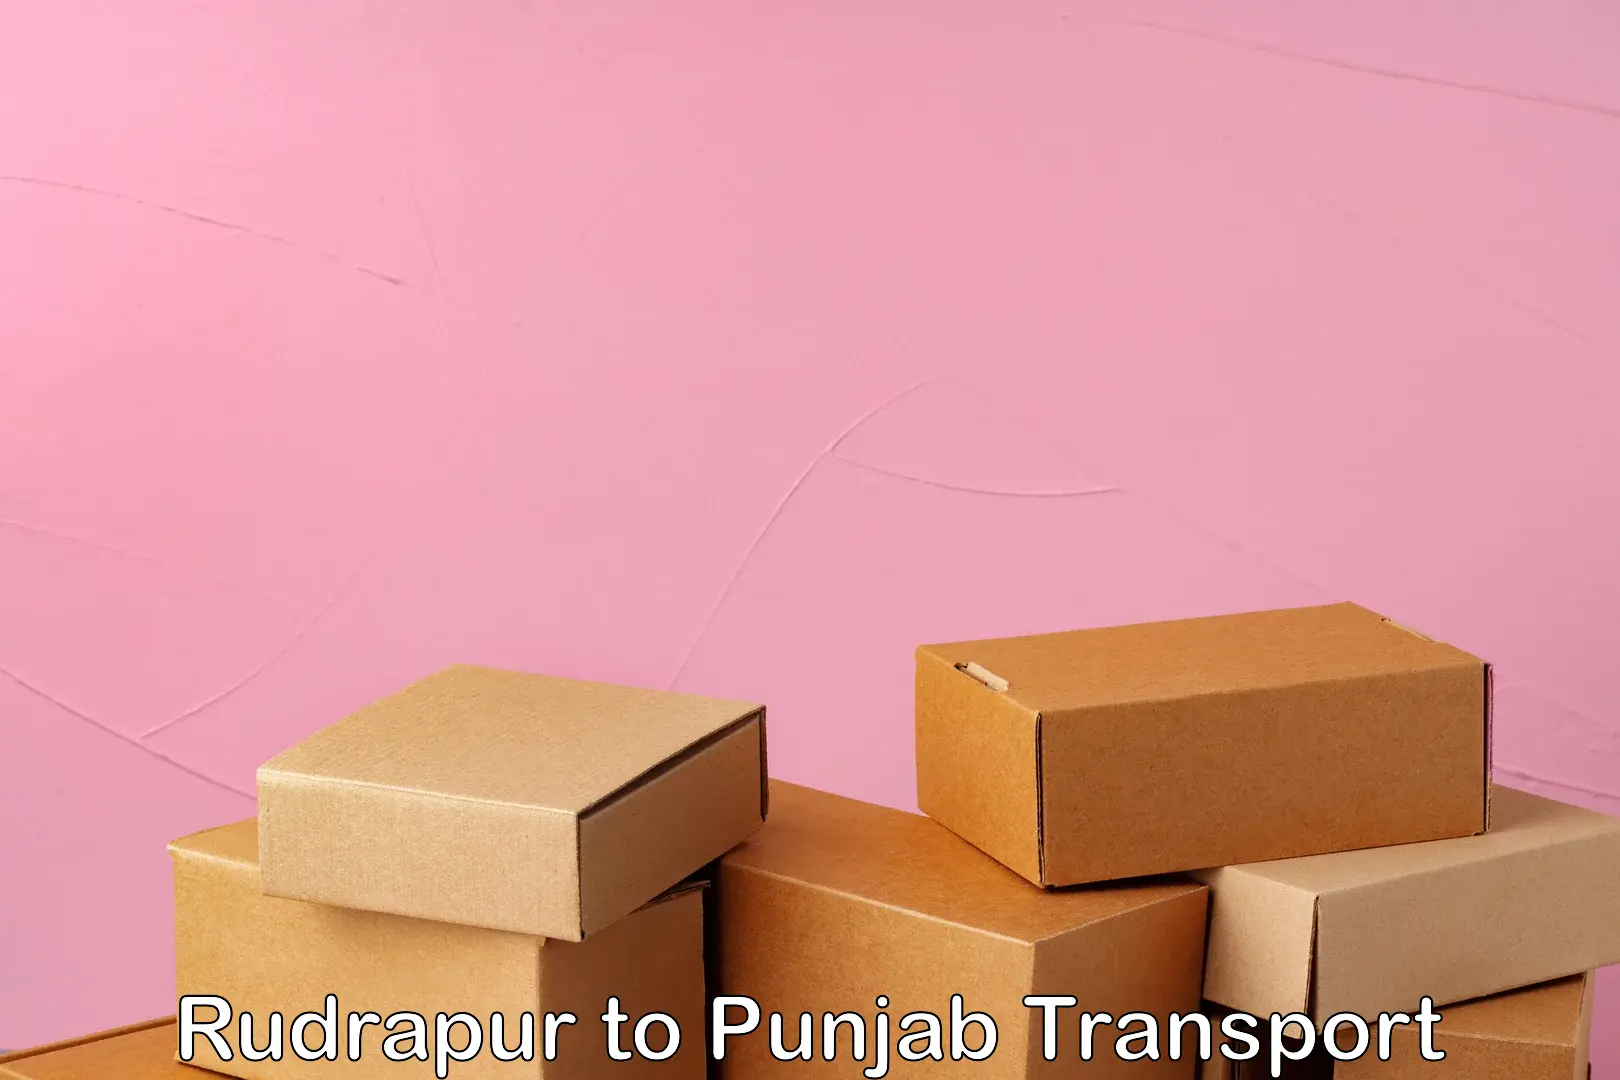 Transport bike from one state to another Rudrapur to Amritsar